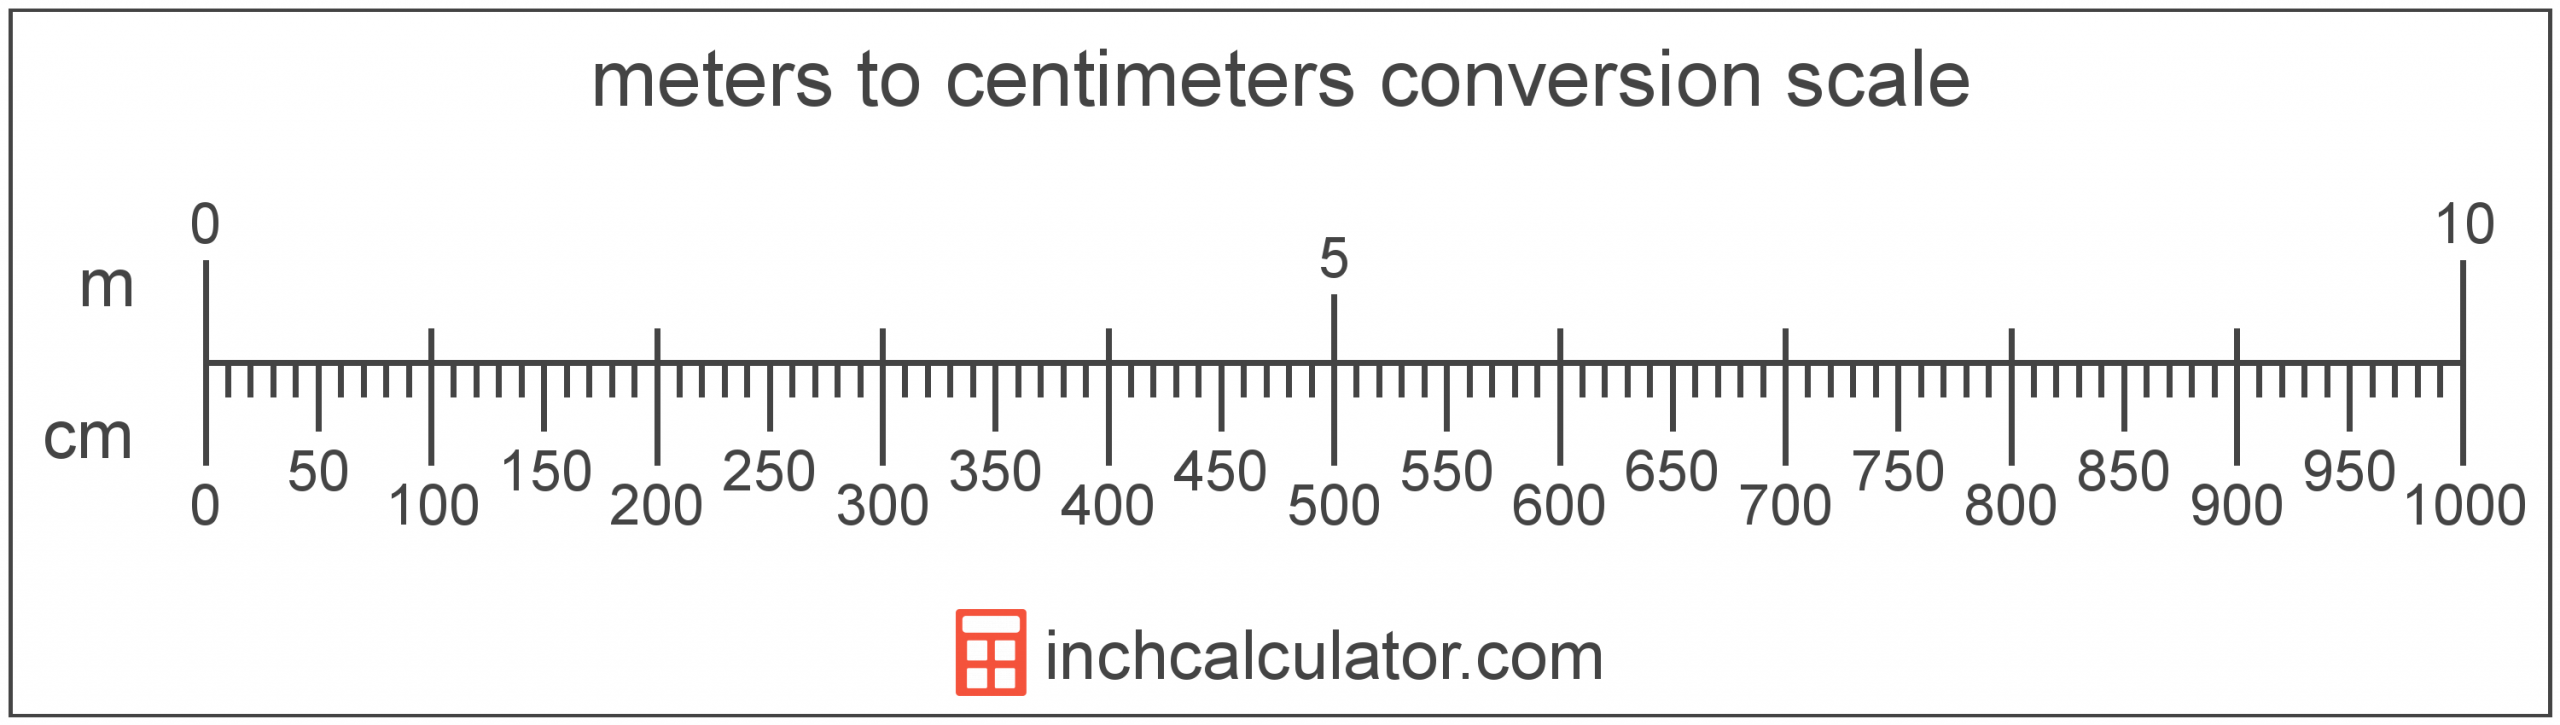 Meters To Centimeters Conversion (M To Cm) - Inch Calculator